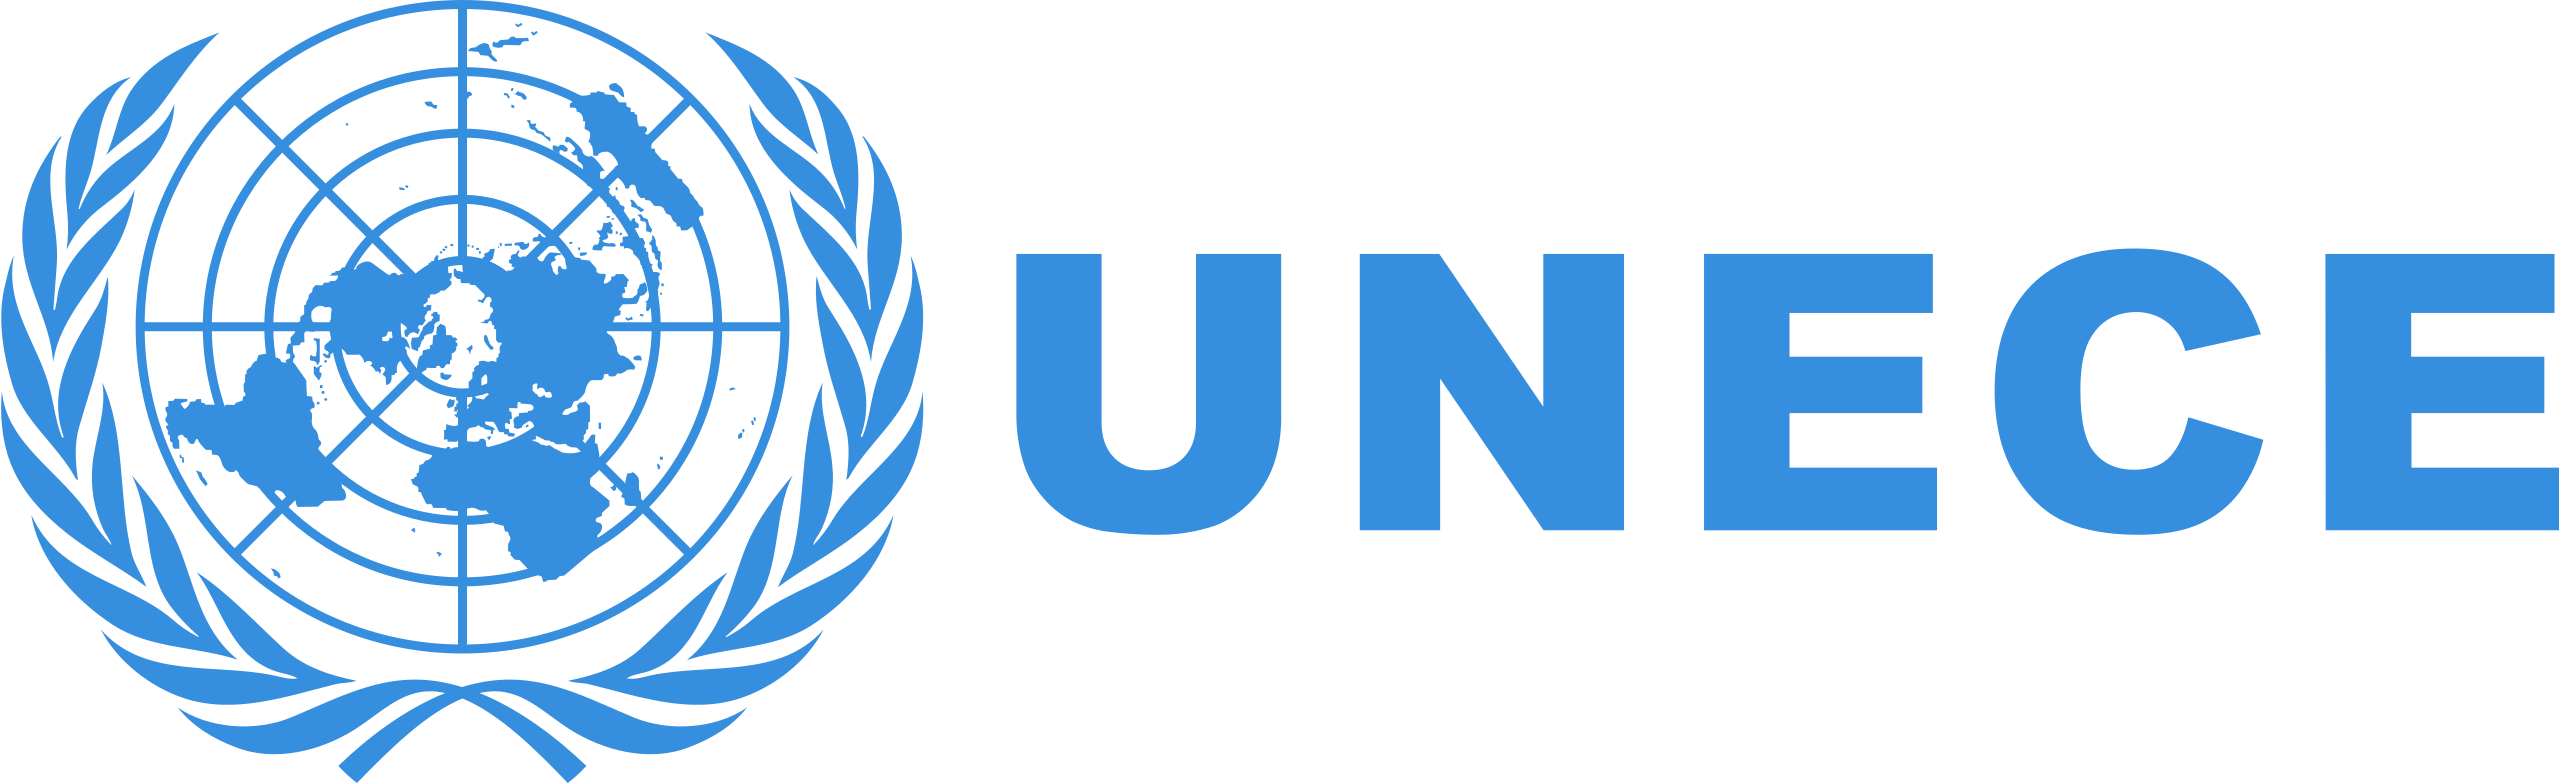 United Nations Economic Commission for Europe (UNECE) Protocol on Pollutant Release and Transfer Registers (PRTRs) : supporting access to information on plastic pollution and promoting green and circular economy